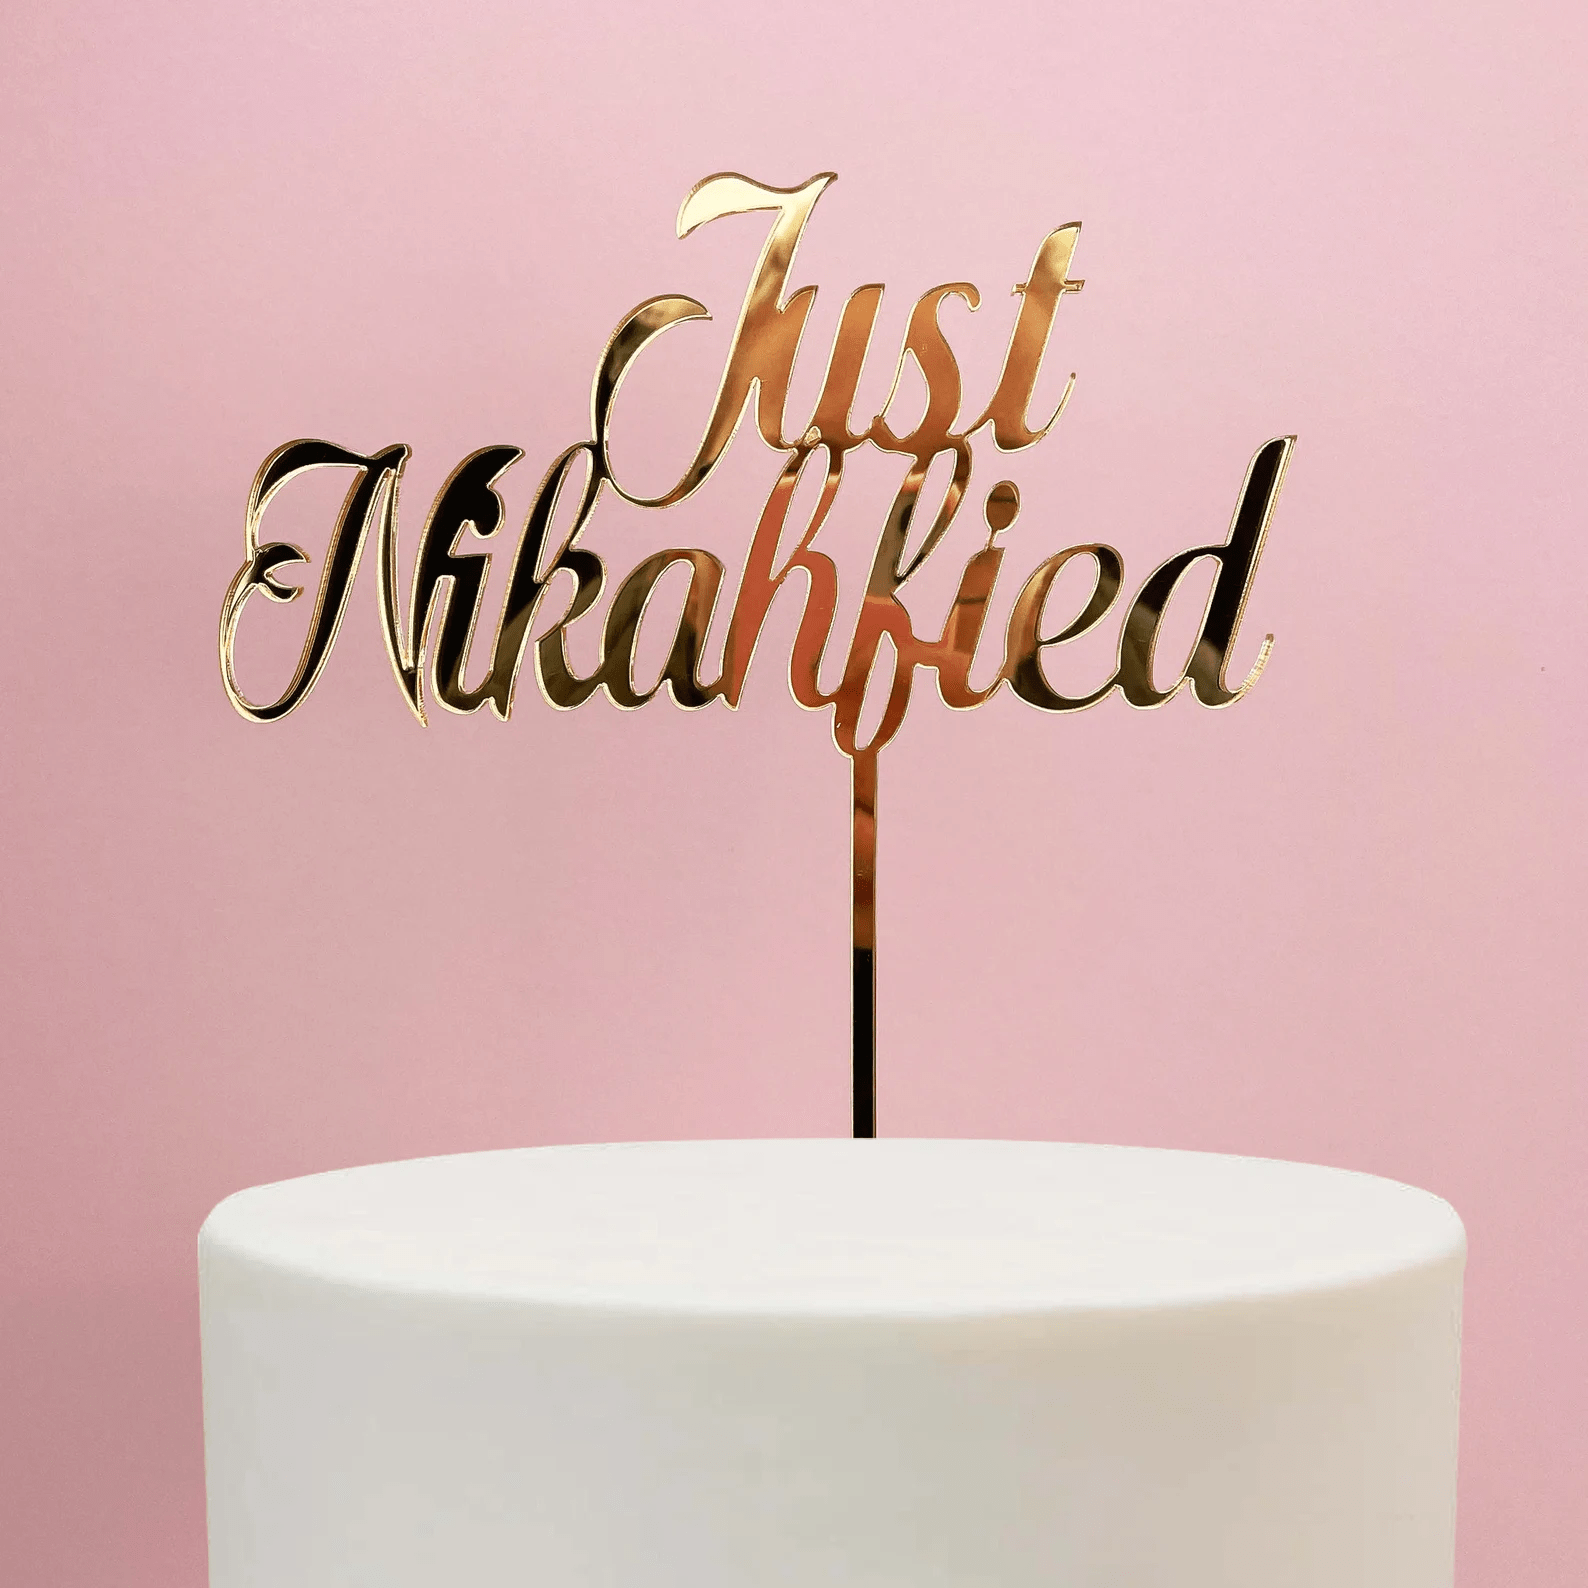 Just Nikahfied Wedding Cake Topper - Cake Topper